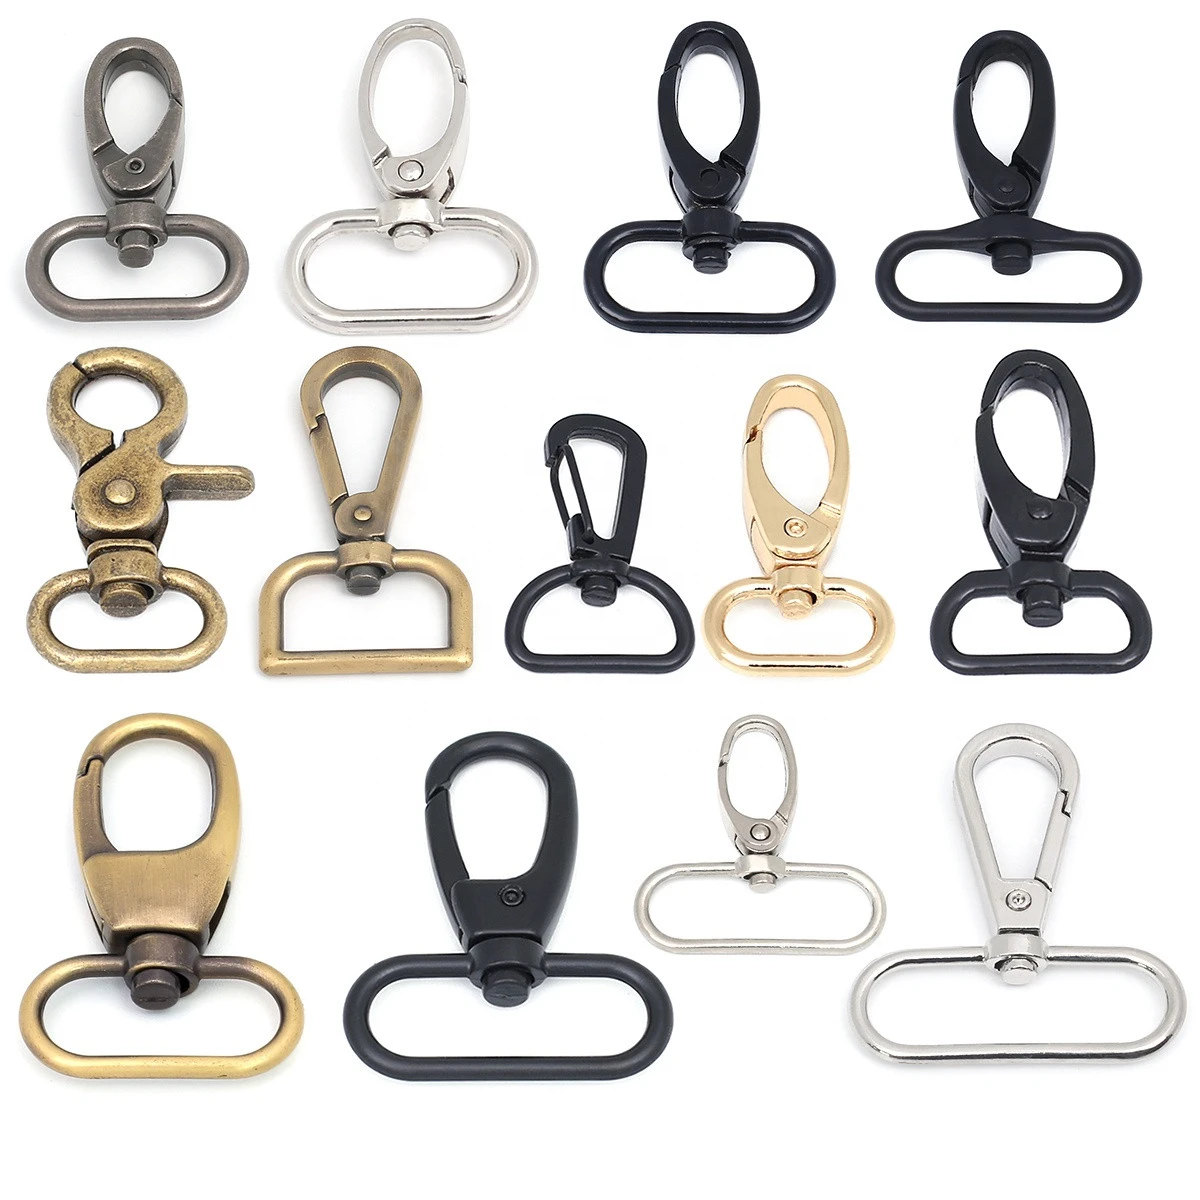 4pcs Lexing 20/26/32/38mm Metal Bags Strap Buckles Lobster Clasp Collar Carabiner Snap Hook DIY KeyChain Bag Part Accessories